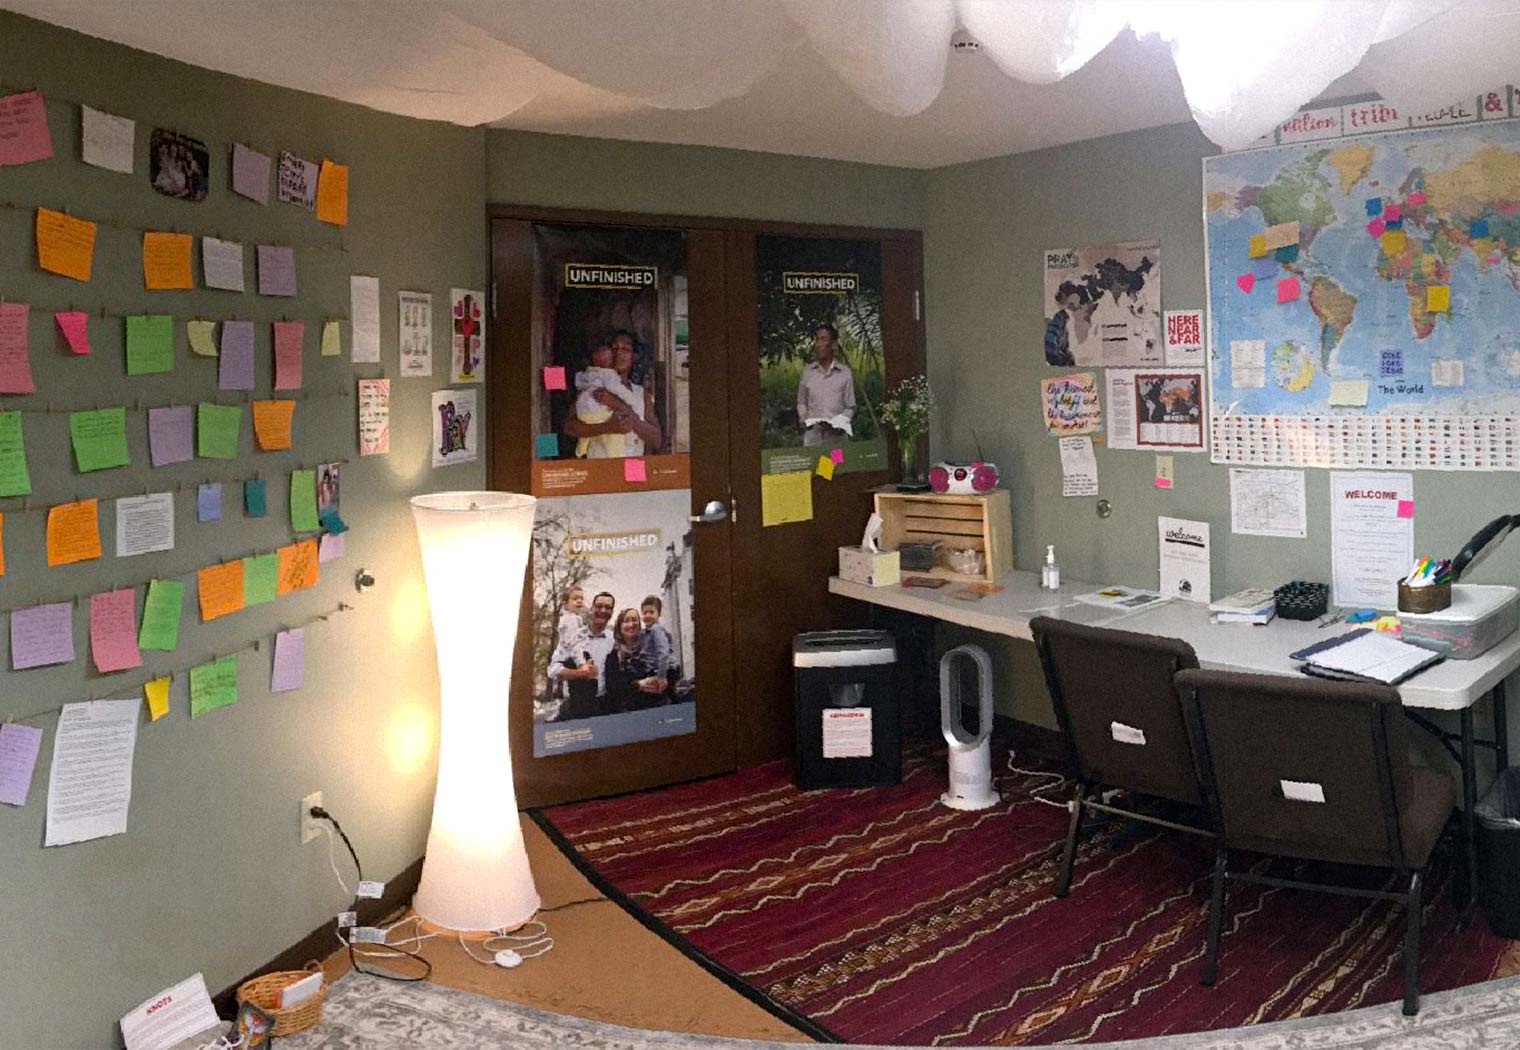 What’s it really like in a 24-7 Prayer Room?